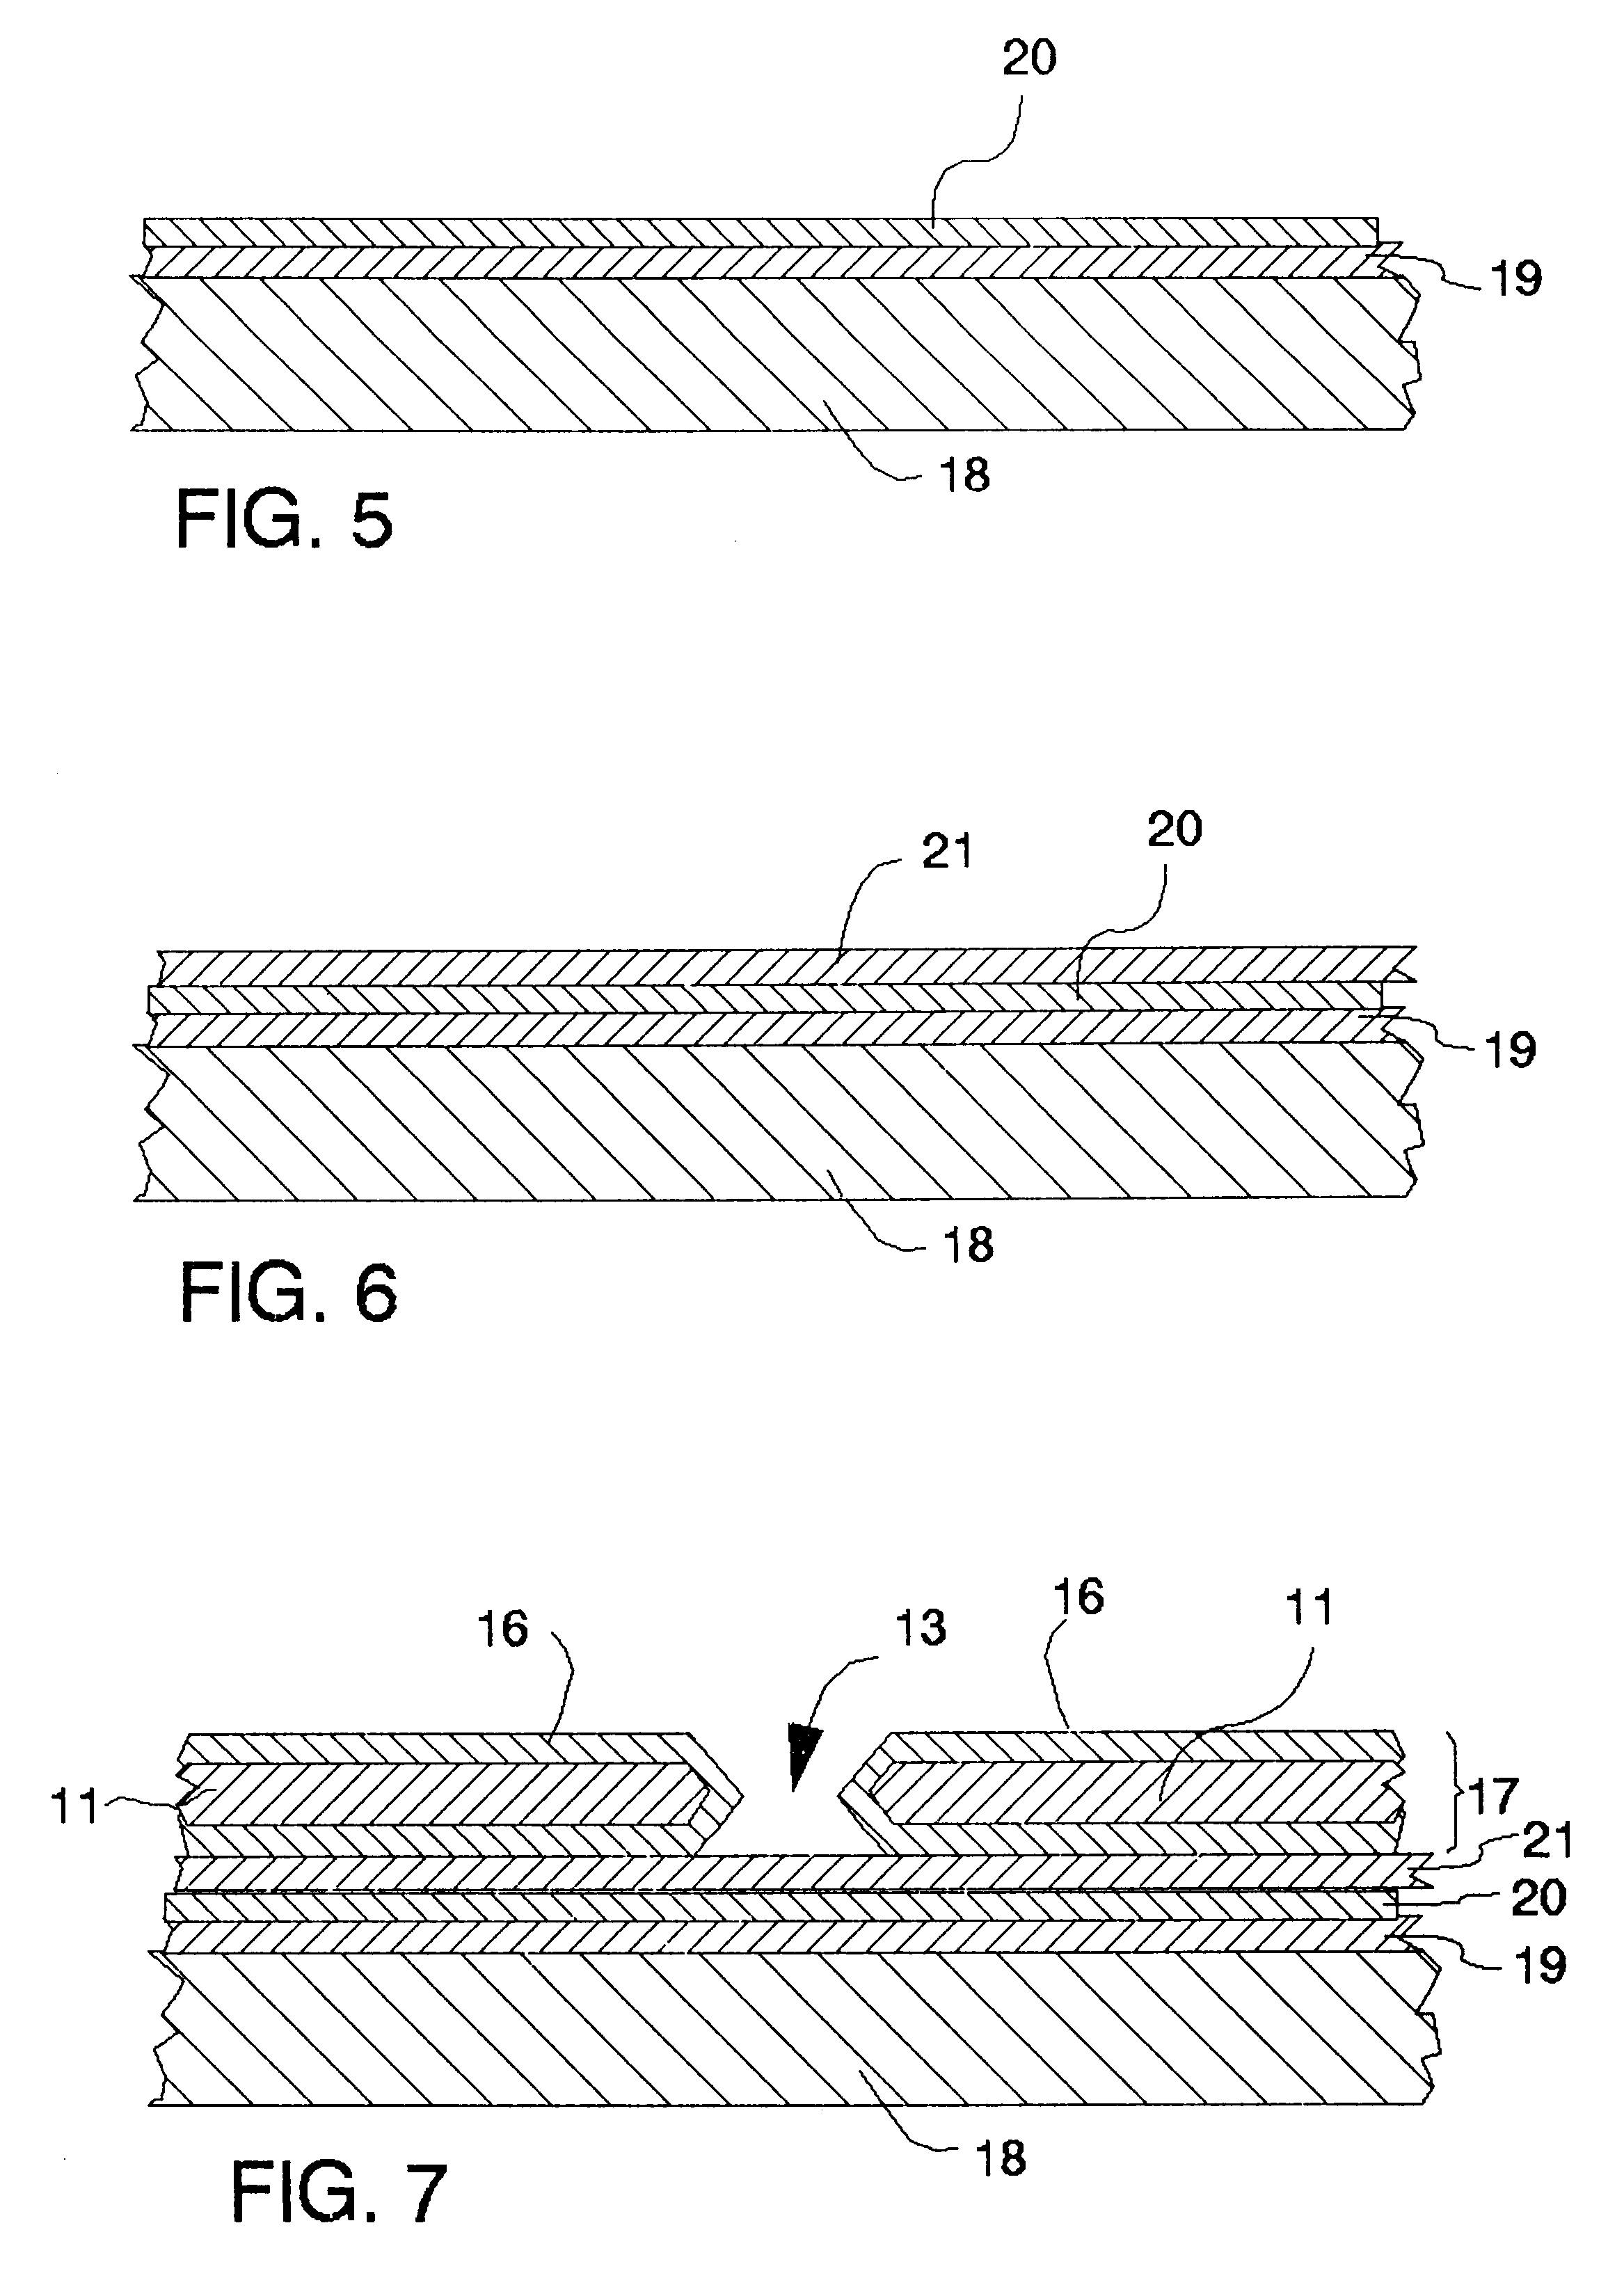 Structure and process for thin film interconnect